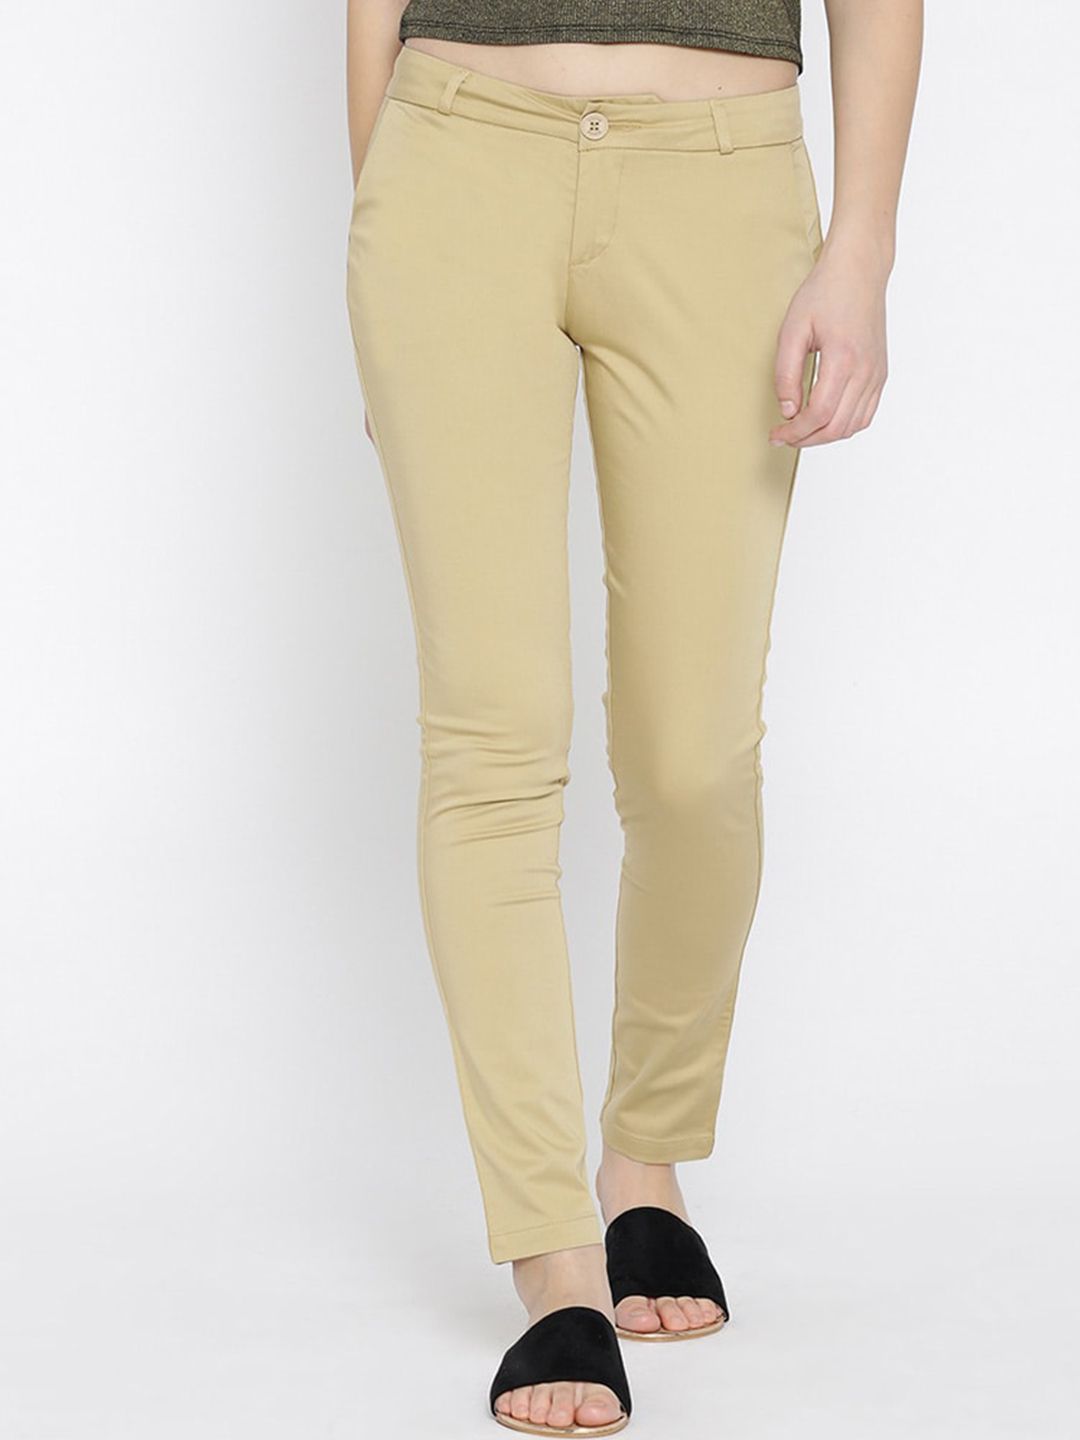 Xpose Women Beige Comfort Slim Fit Cotton Trousers Price in India